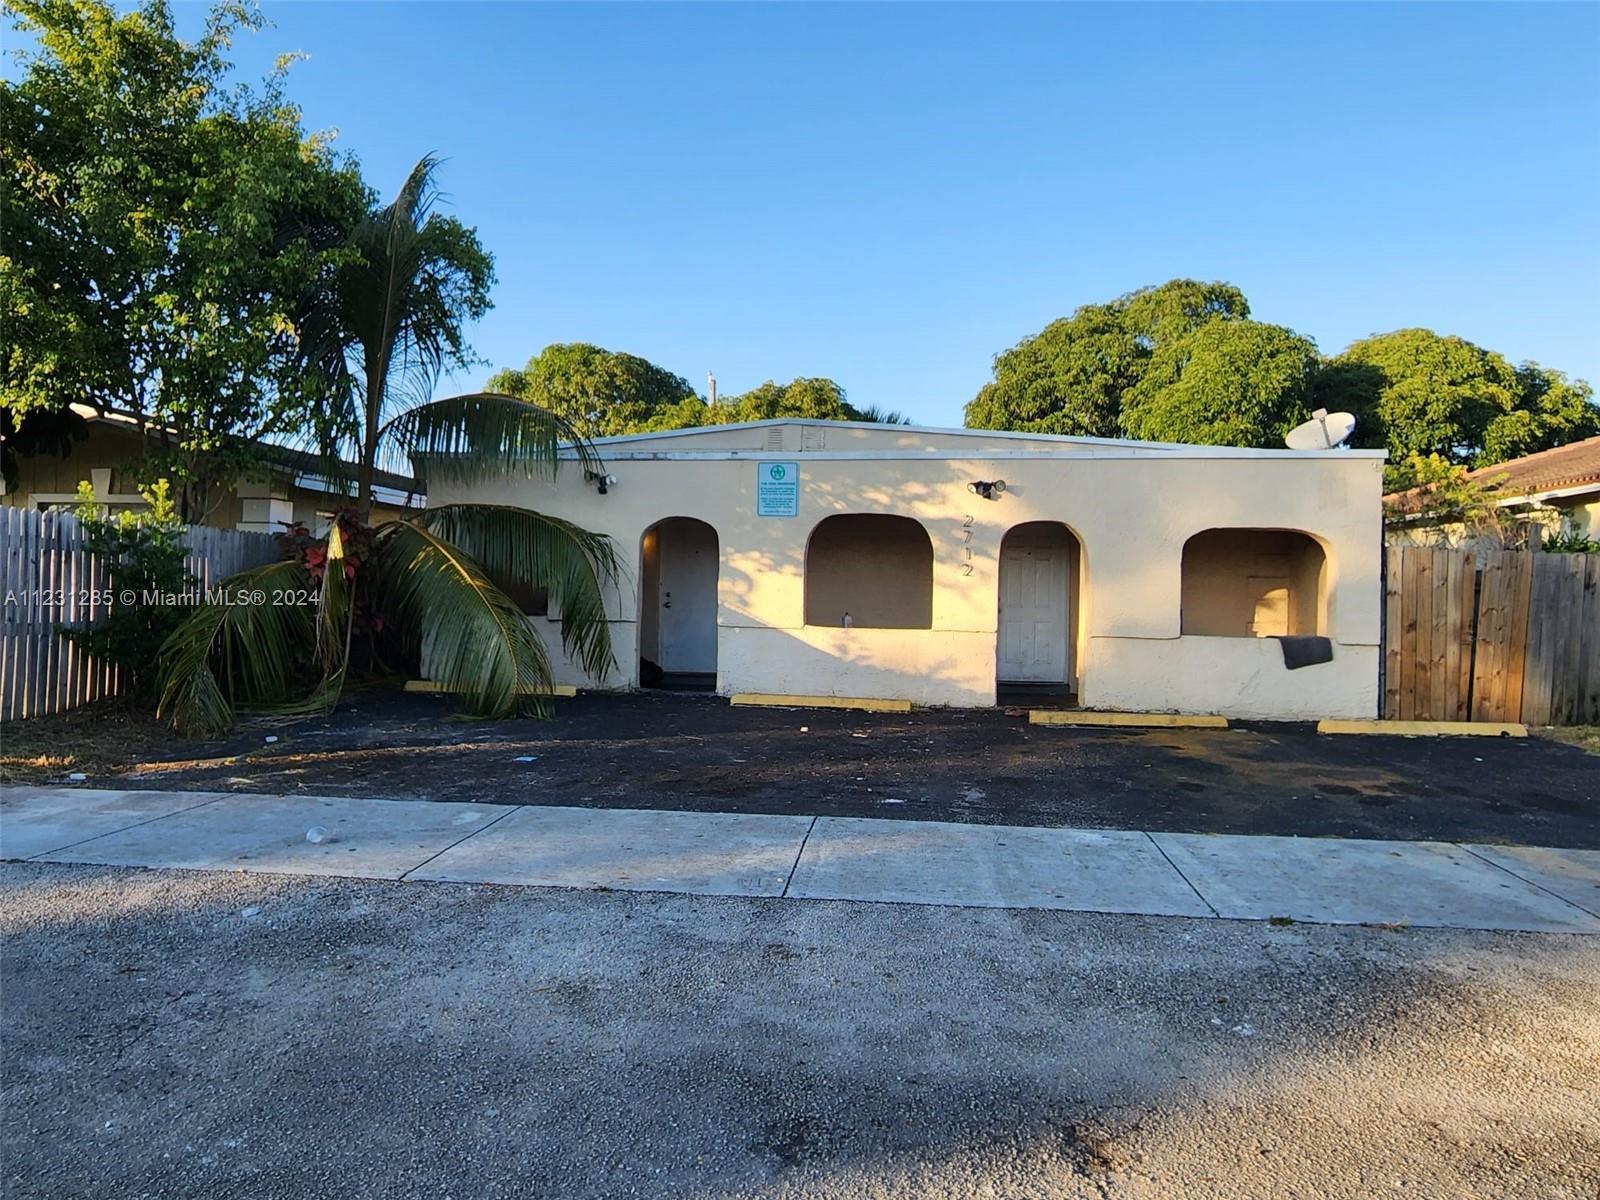 Photo of 2712 NW 14th St in Fort Lauderdale, FL